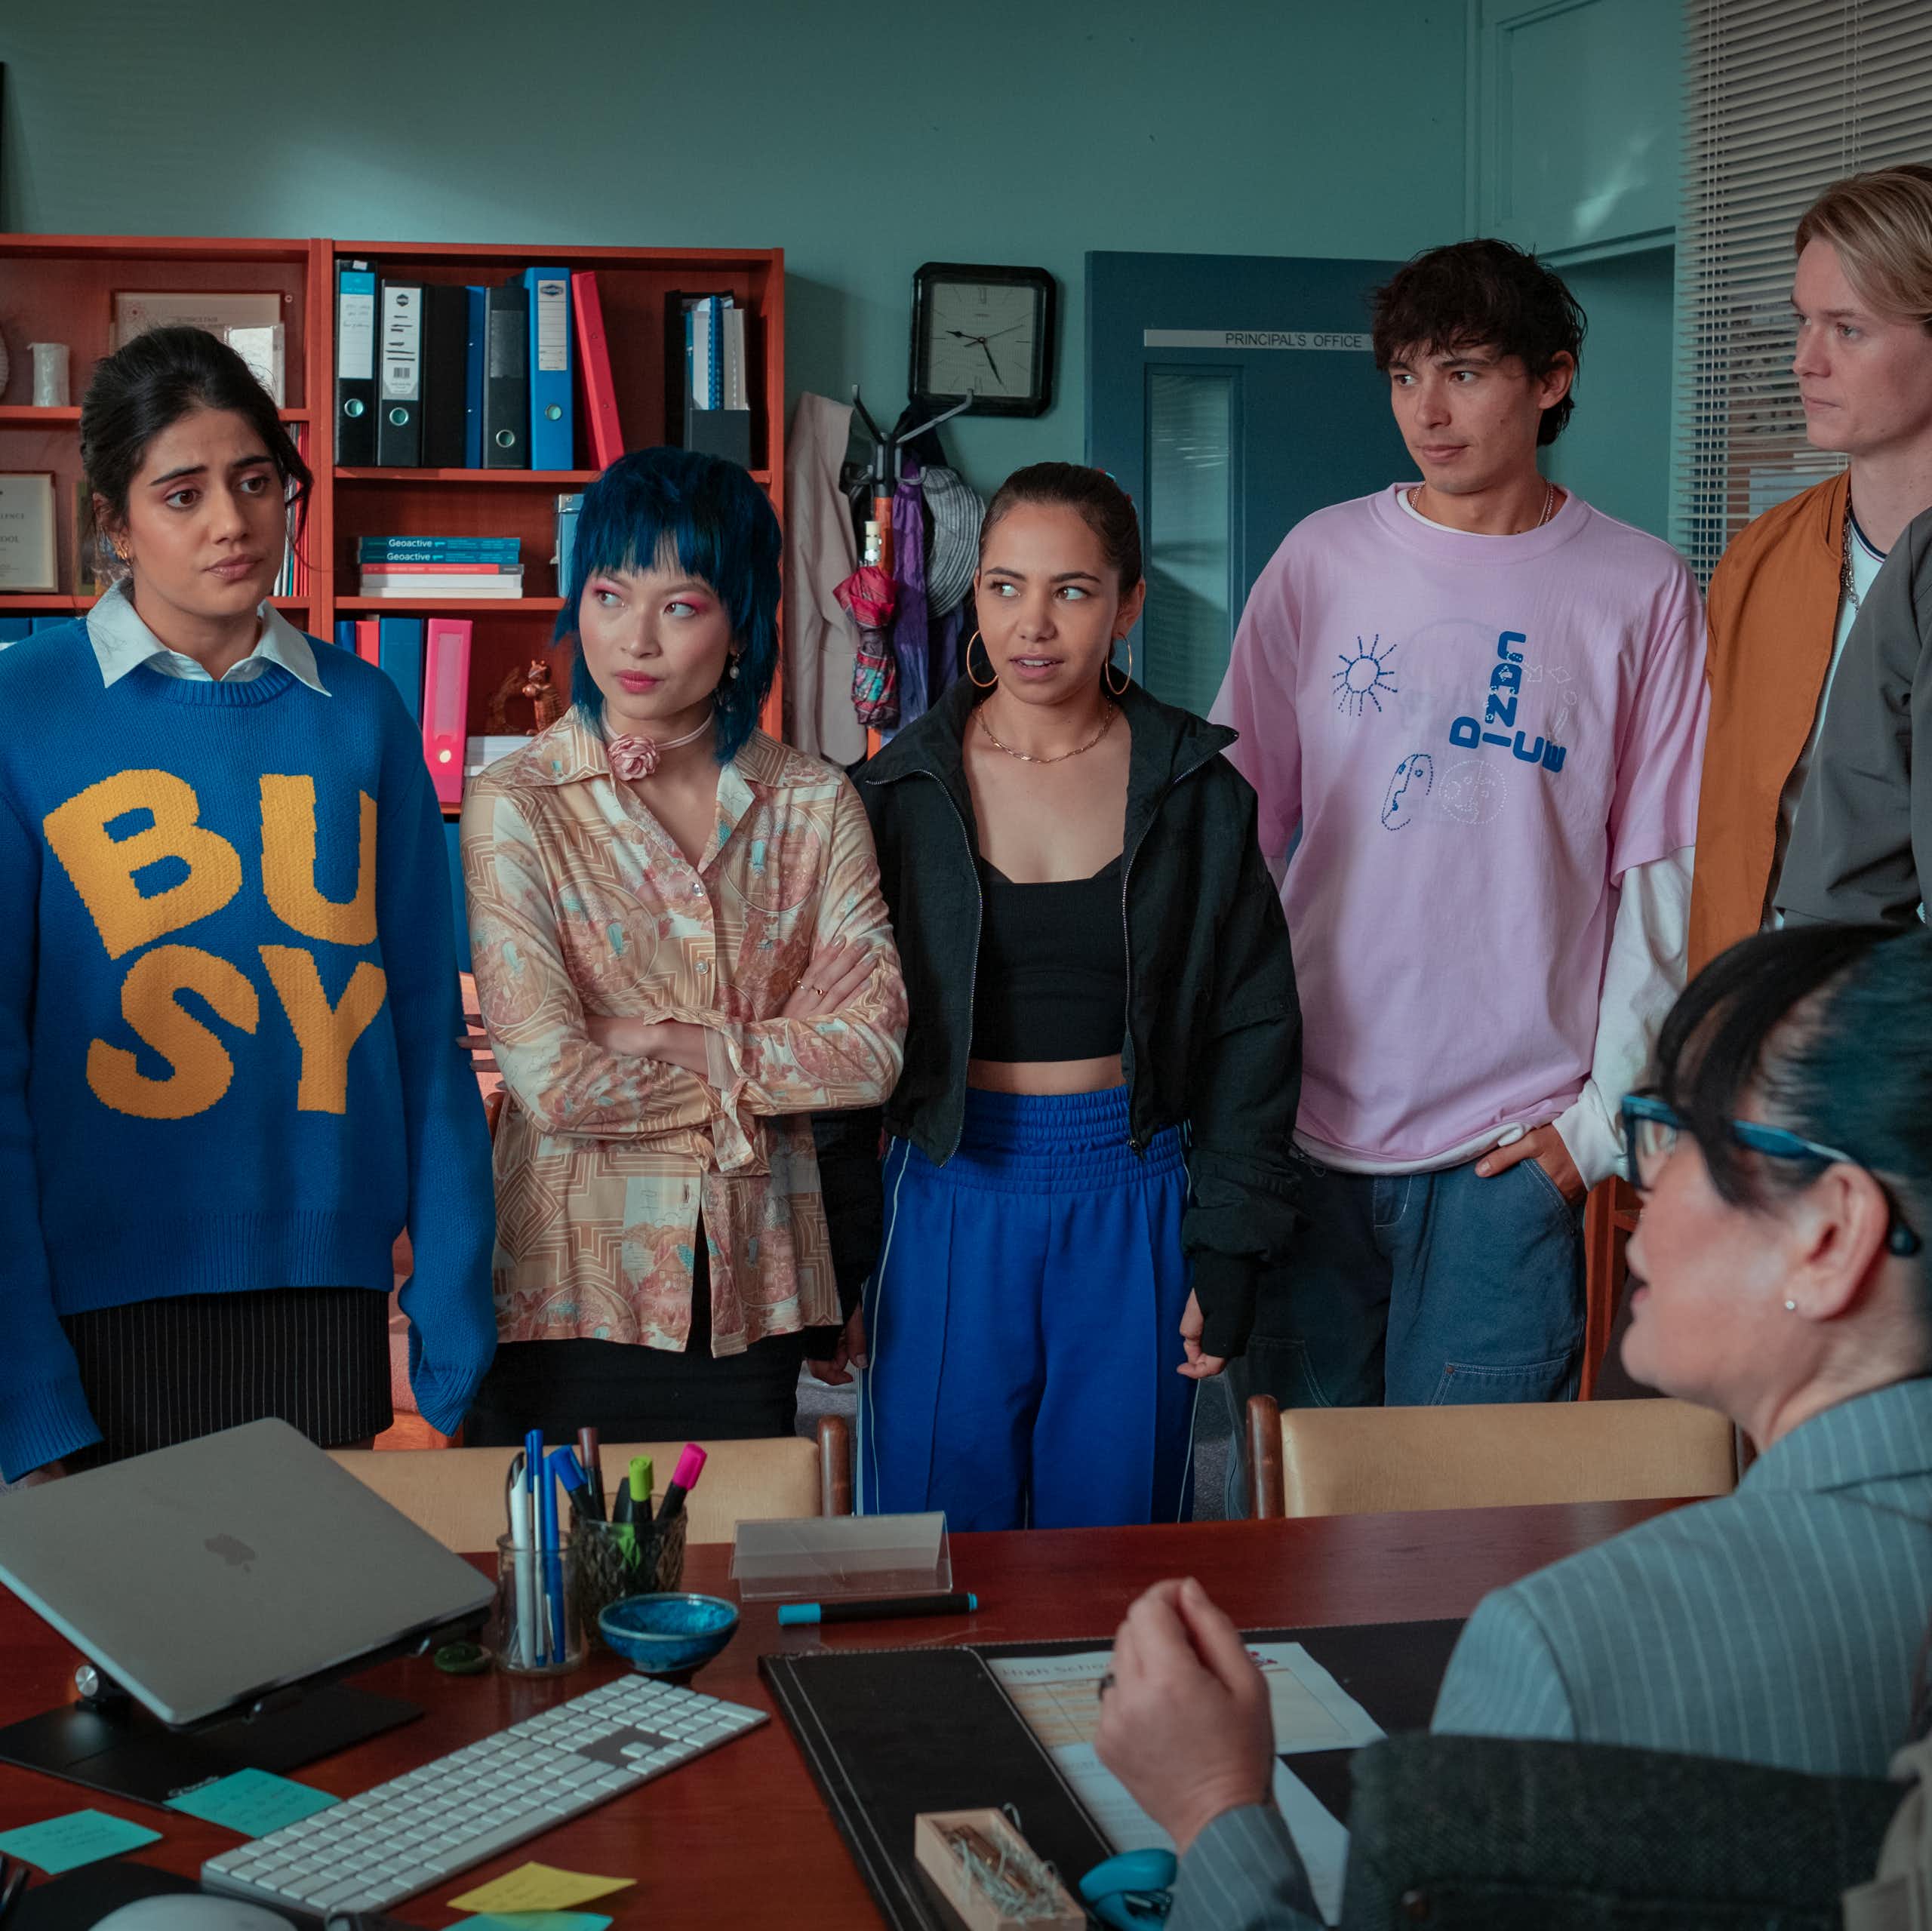 Production image. Students in the principal's office.